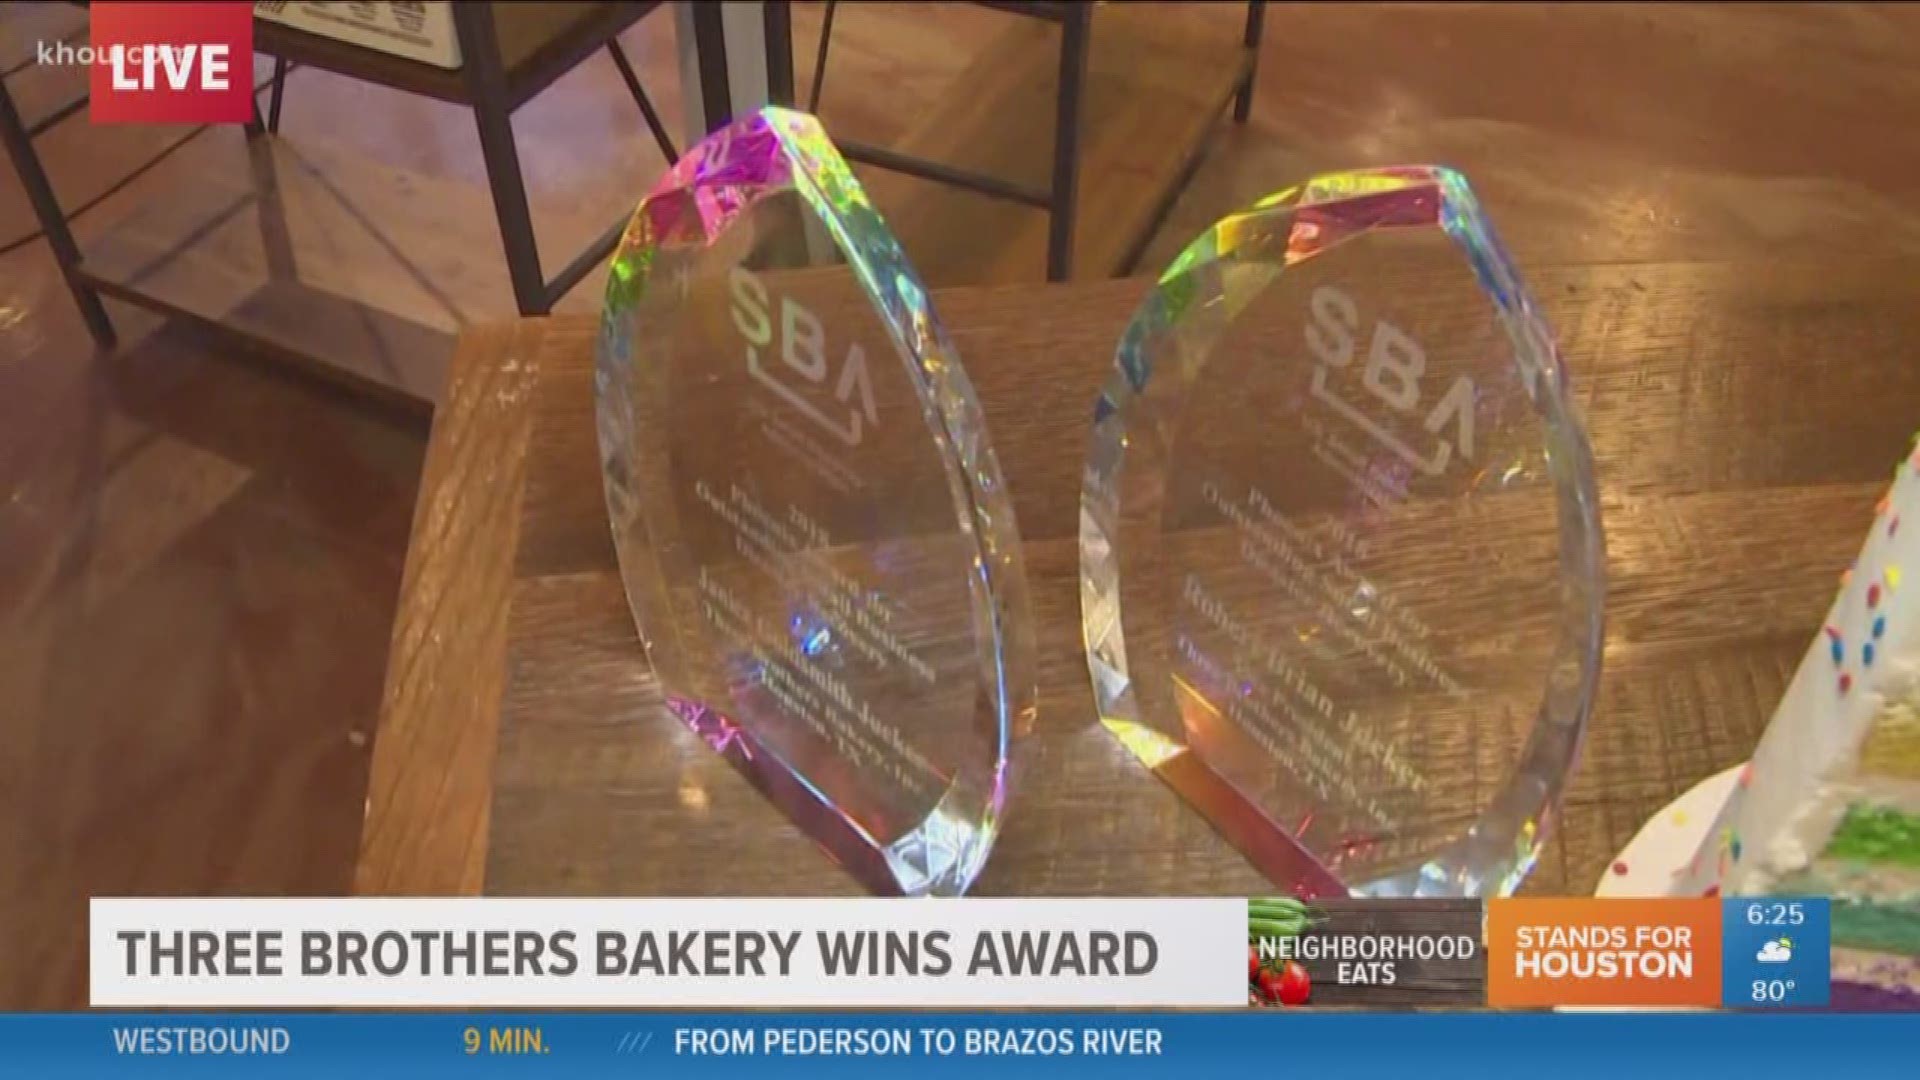 In this morning's Neighborhood Eats one of Houston's oldest bakeries is celebrating a national award. Recently Three Brothers Bakery received the Phoenix Award from the nation's Small Business Administration for the way it handled the Harvey disaster.